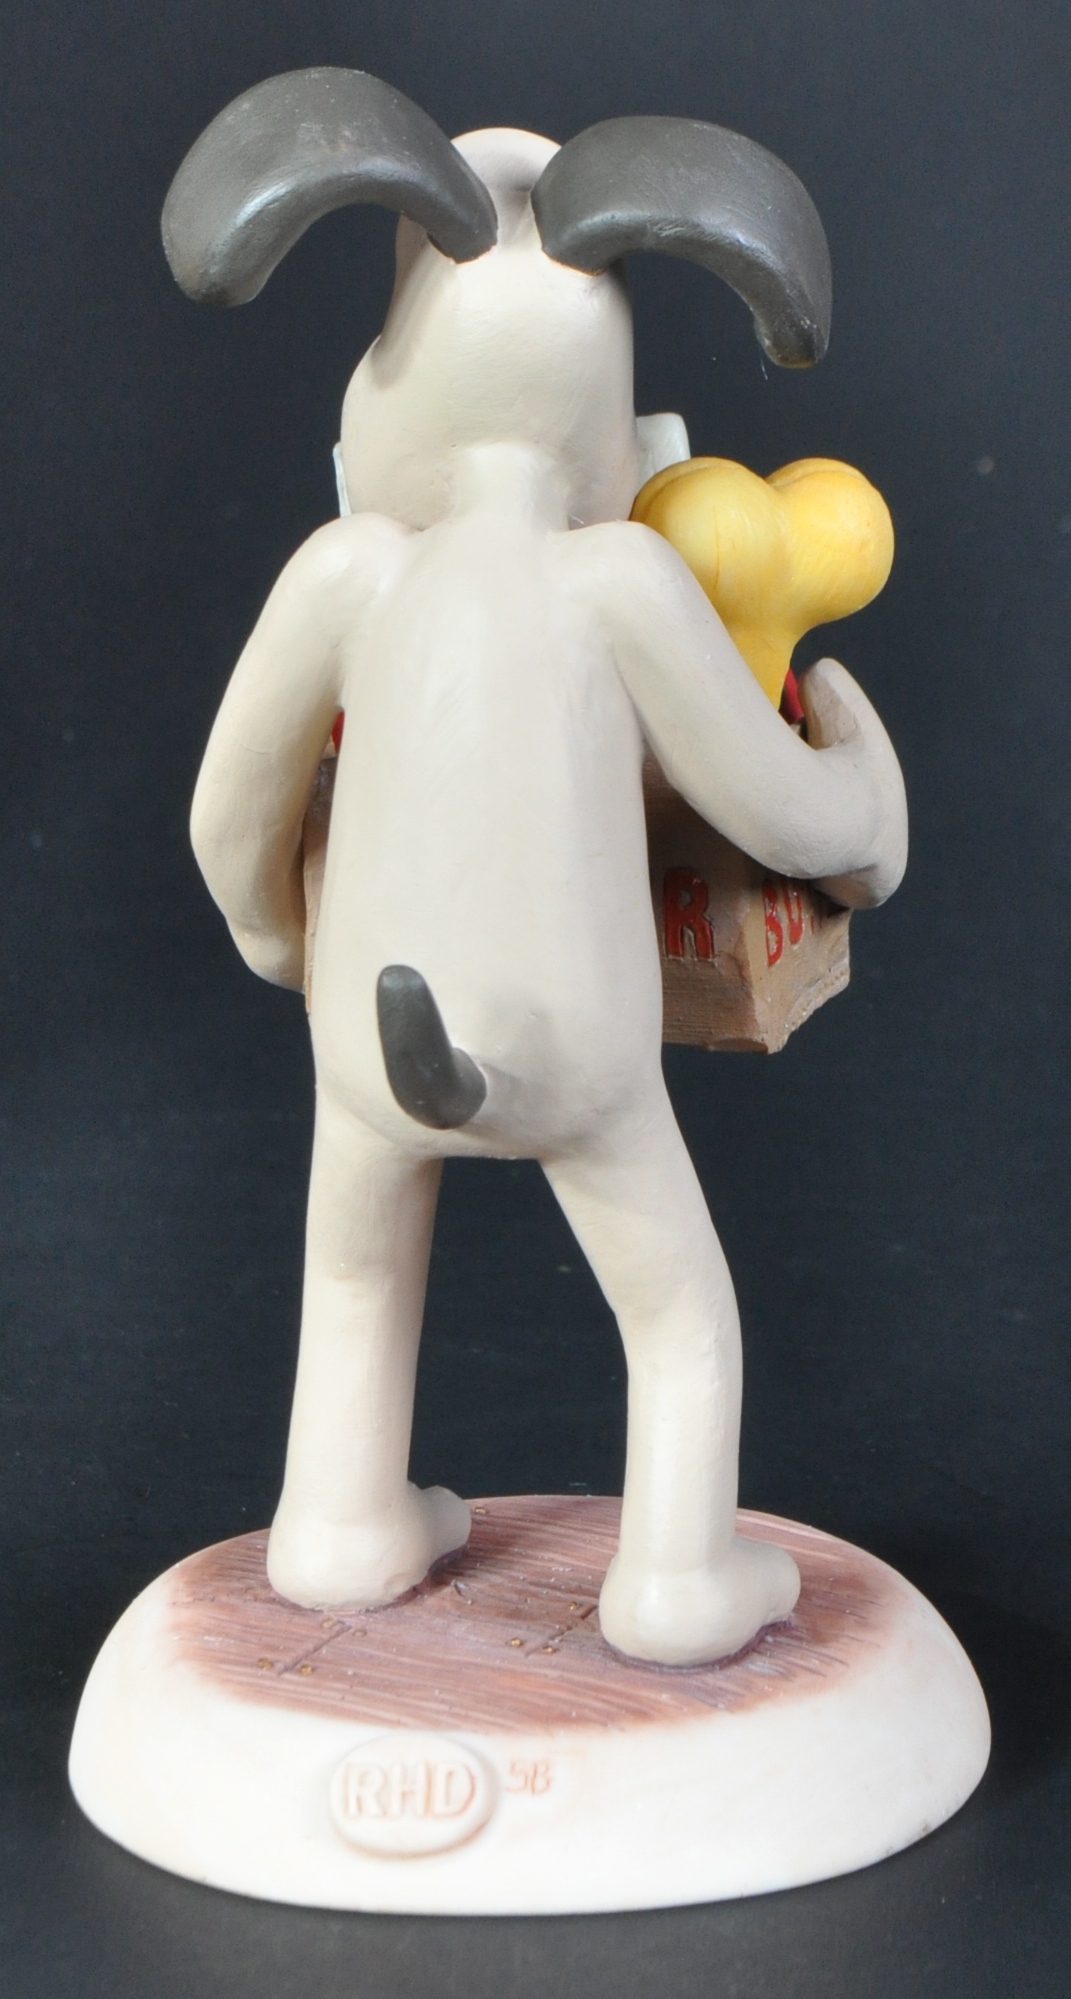 WALLACE & GROMIT - ROBERT HARROP - LIMITED EDITION FIGURINE - Image 4 of 5